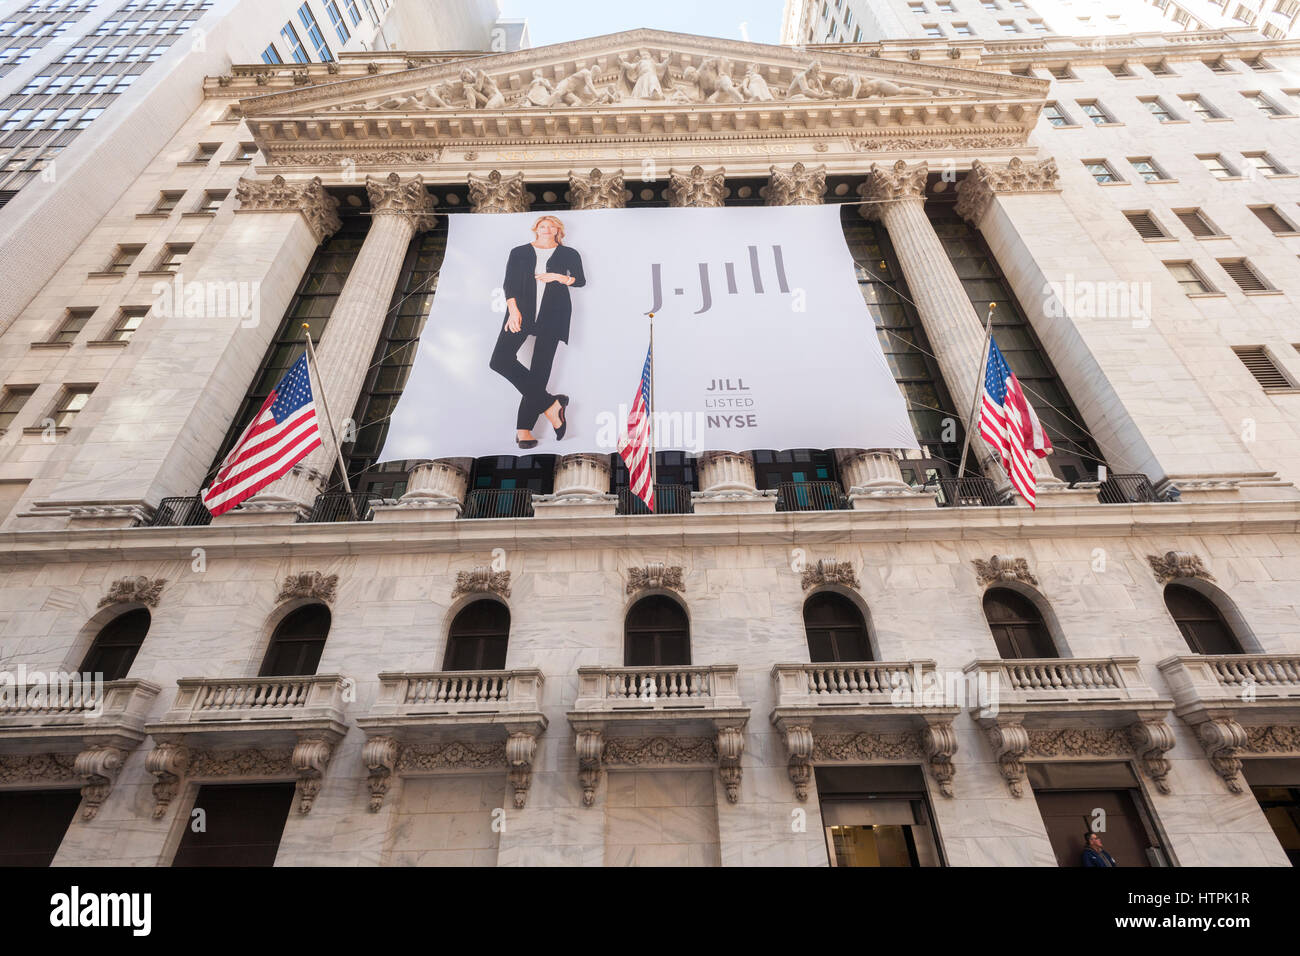 The New York Stock Exchange is decorated on Thursday, March 9, 2017 for the initial public offering of the women's wear retailer J. Jill. The Boston-based J. Jill is an omni-channel retailer of women's apparel with both ecommerce and over 270 stores. (© Richard B. Levine) Stock Photo